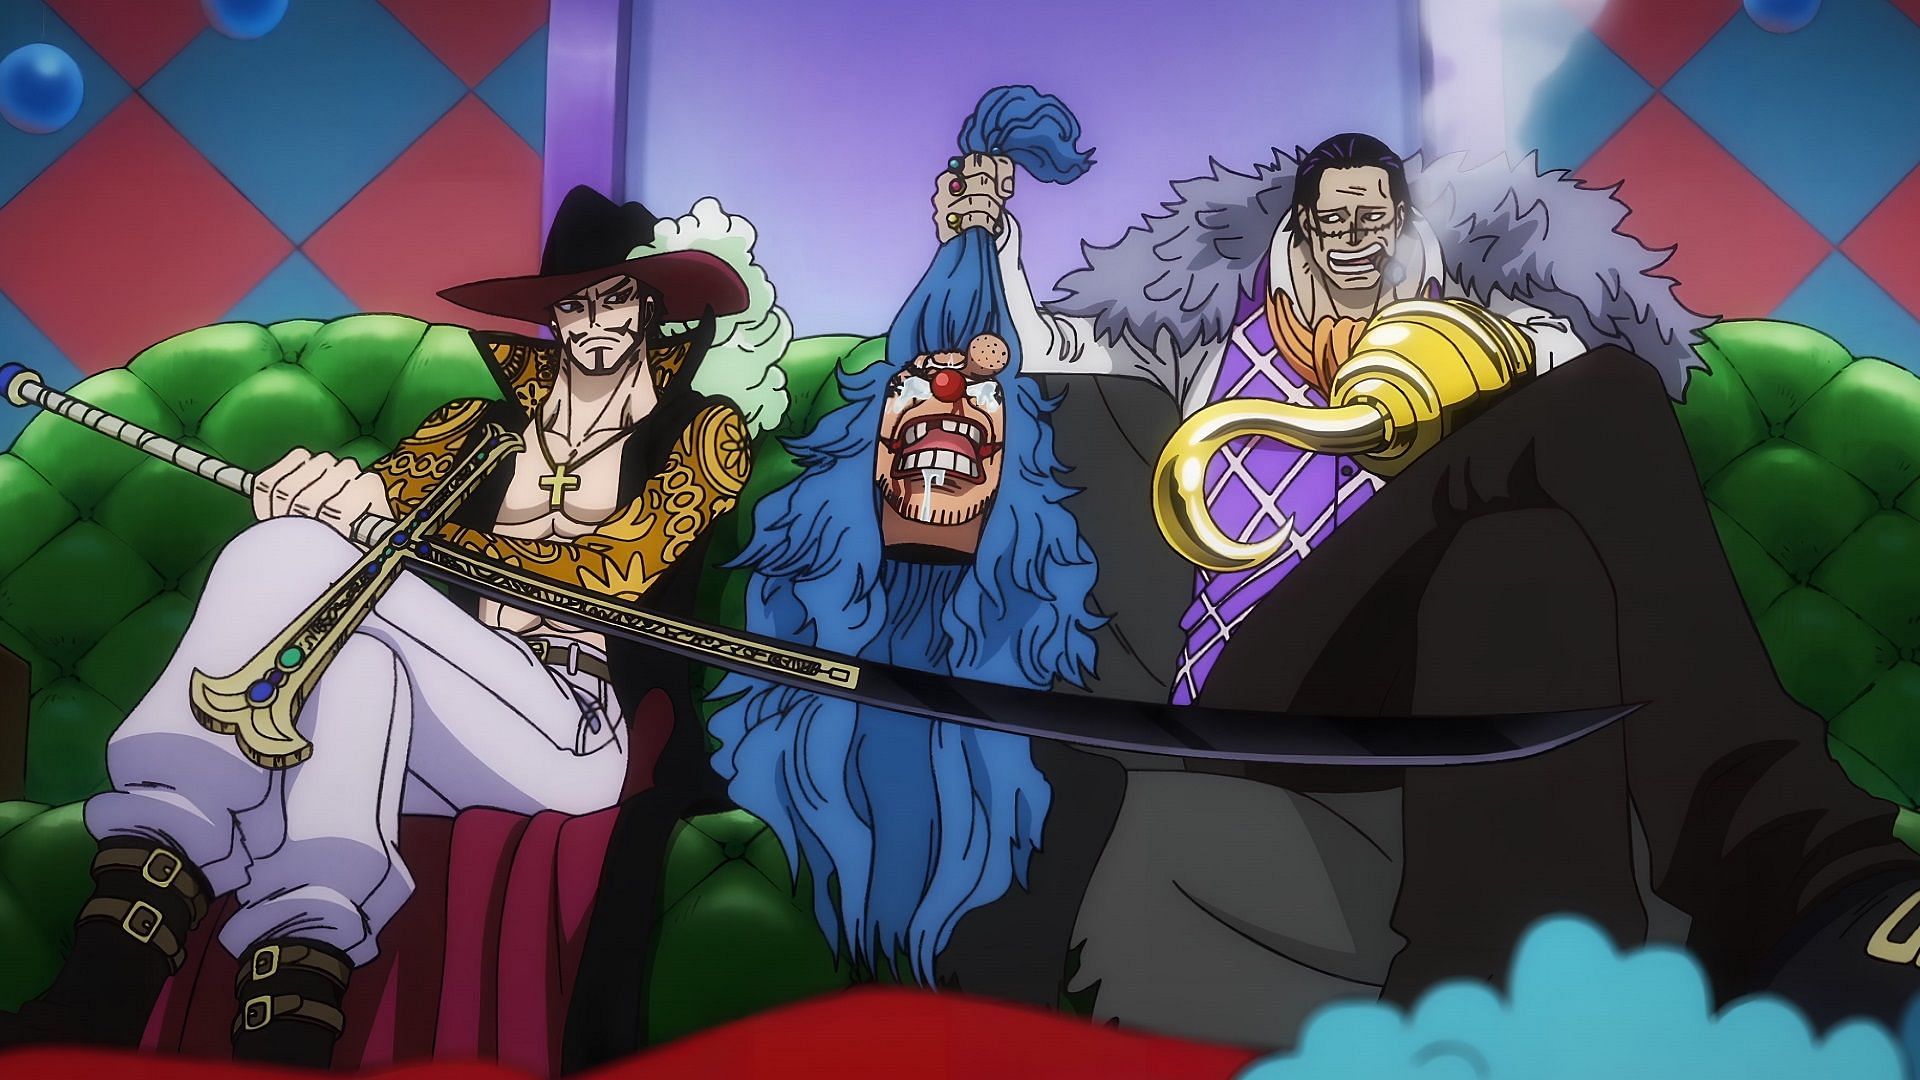 Mihawk, Buggy, and Crocodile as seen in One Piece (Image via Toei Animation)